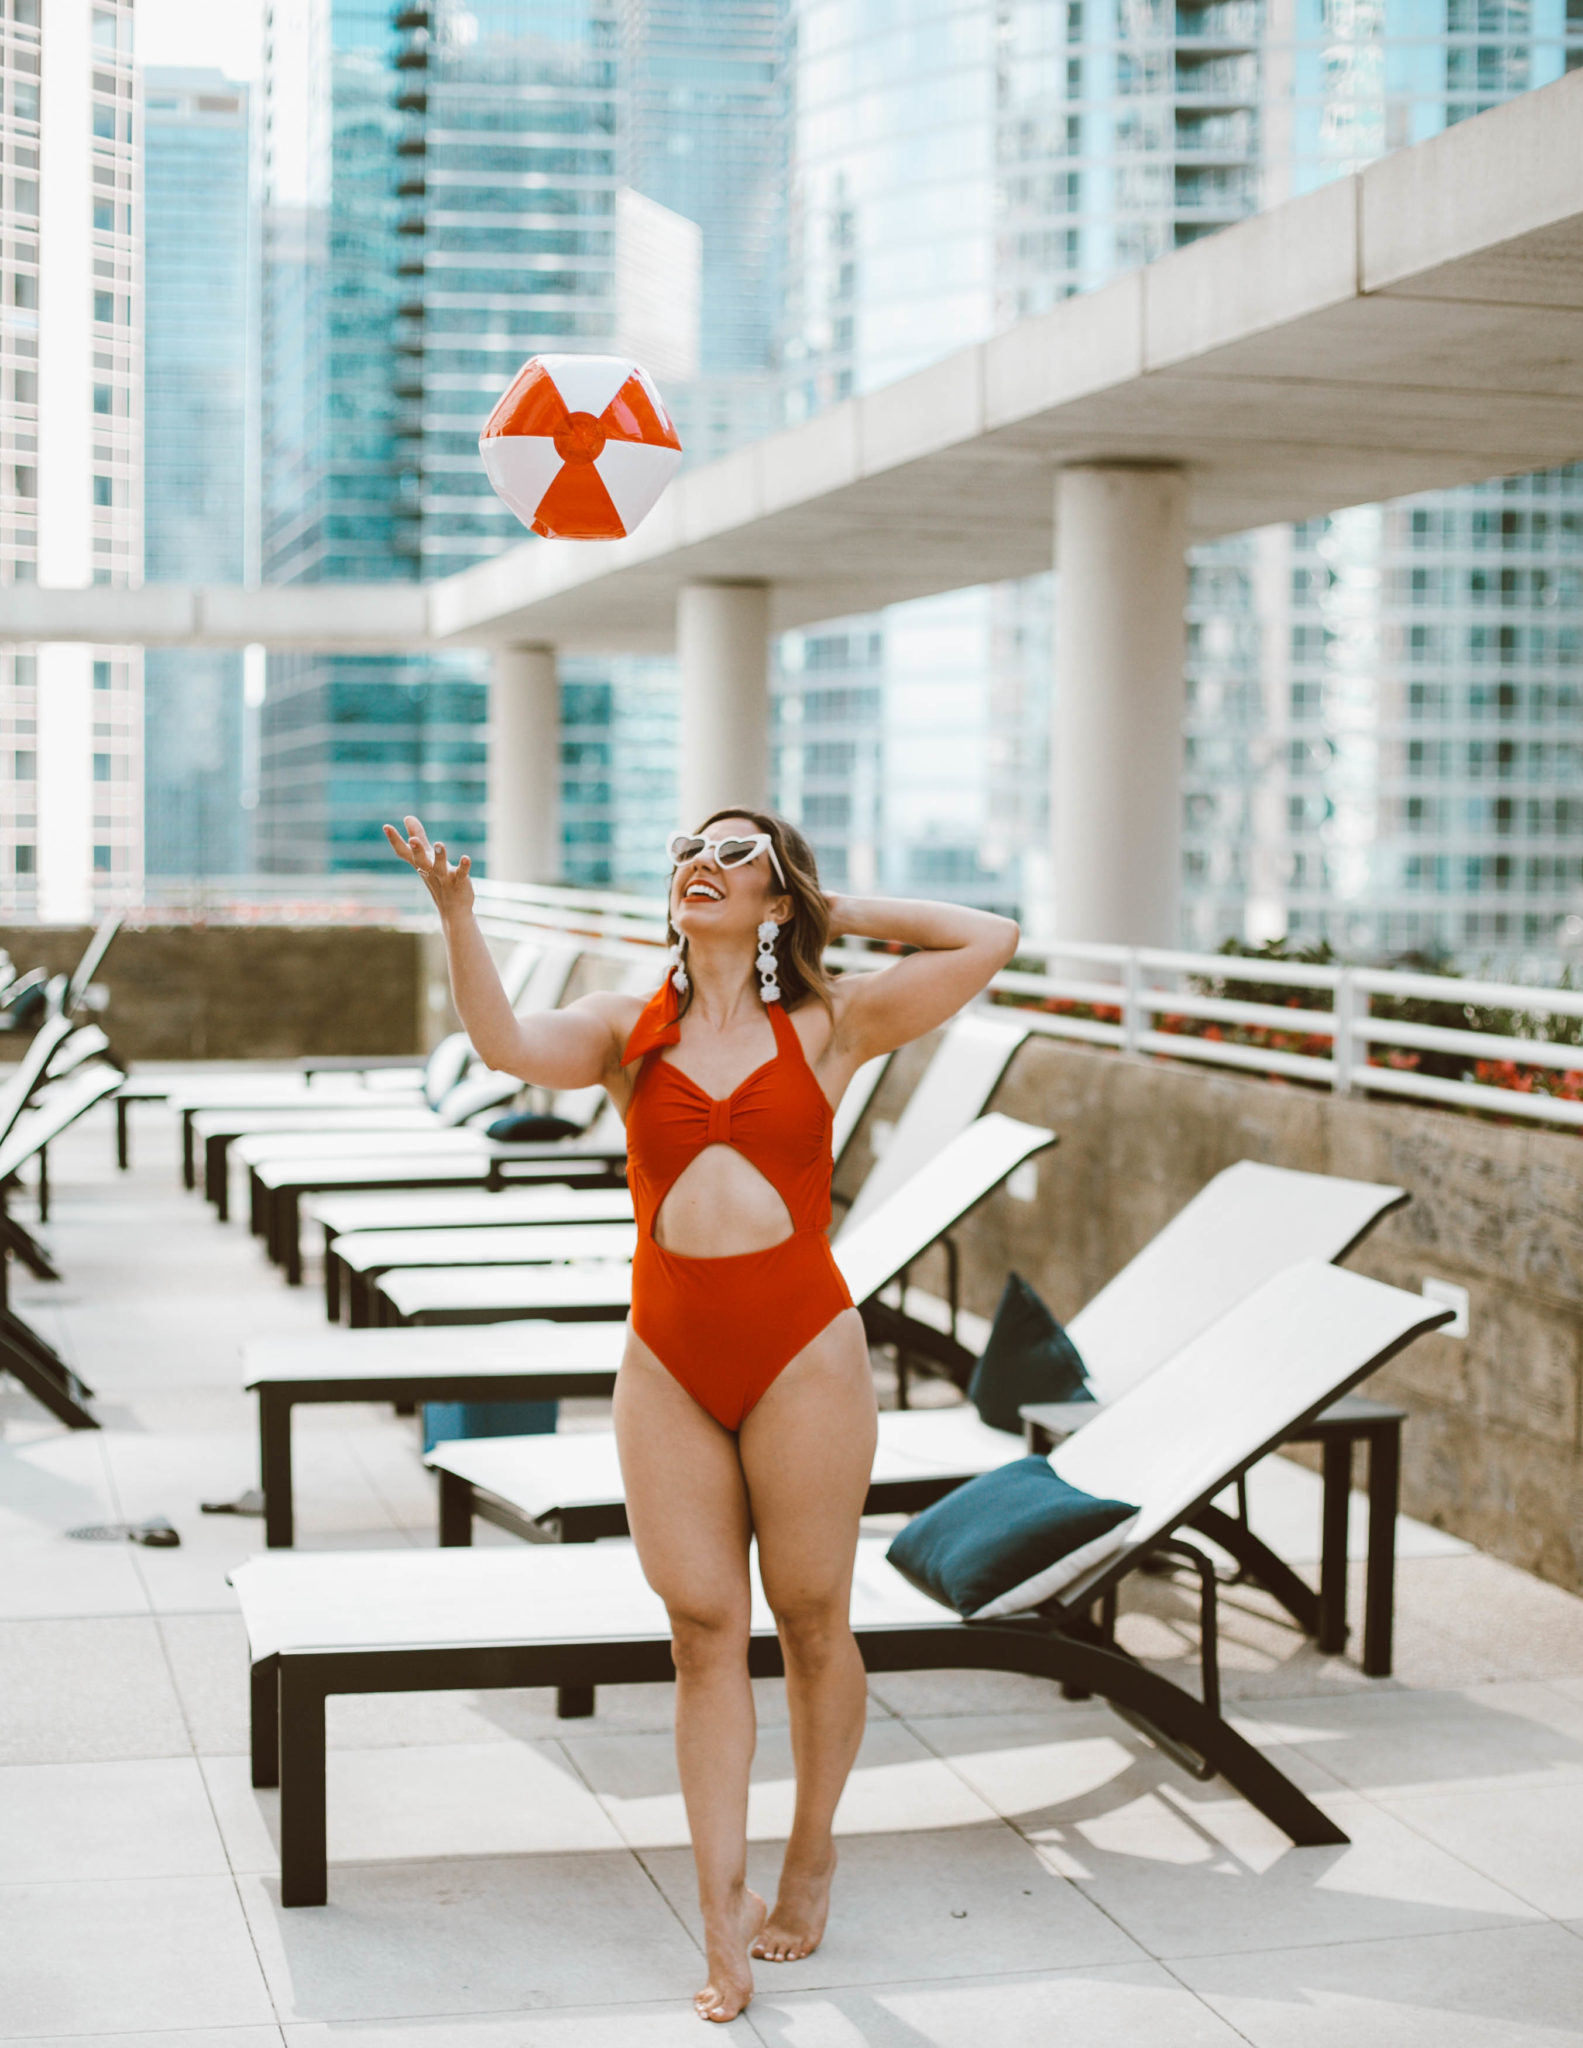 Life's a Beach: Red Swimsuit - Introducing The Magnificent 8 featured by popular Chicago fashion blogger Glass of Glam